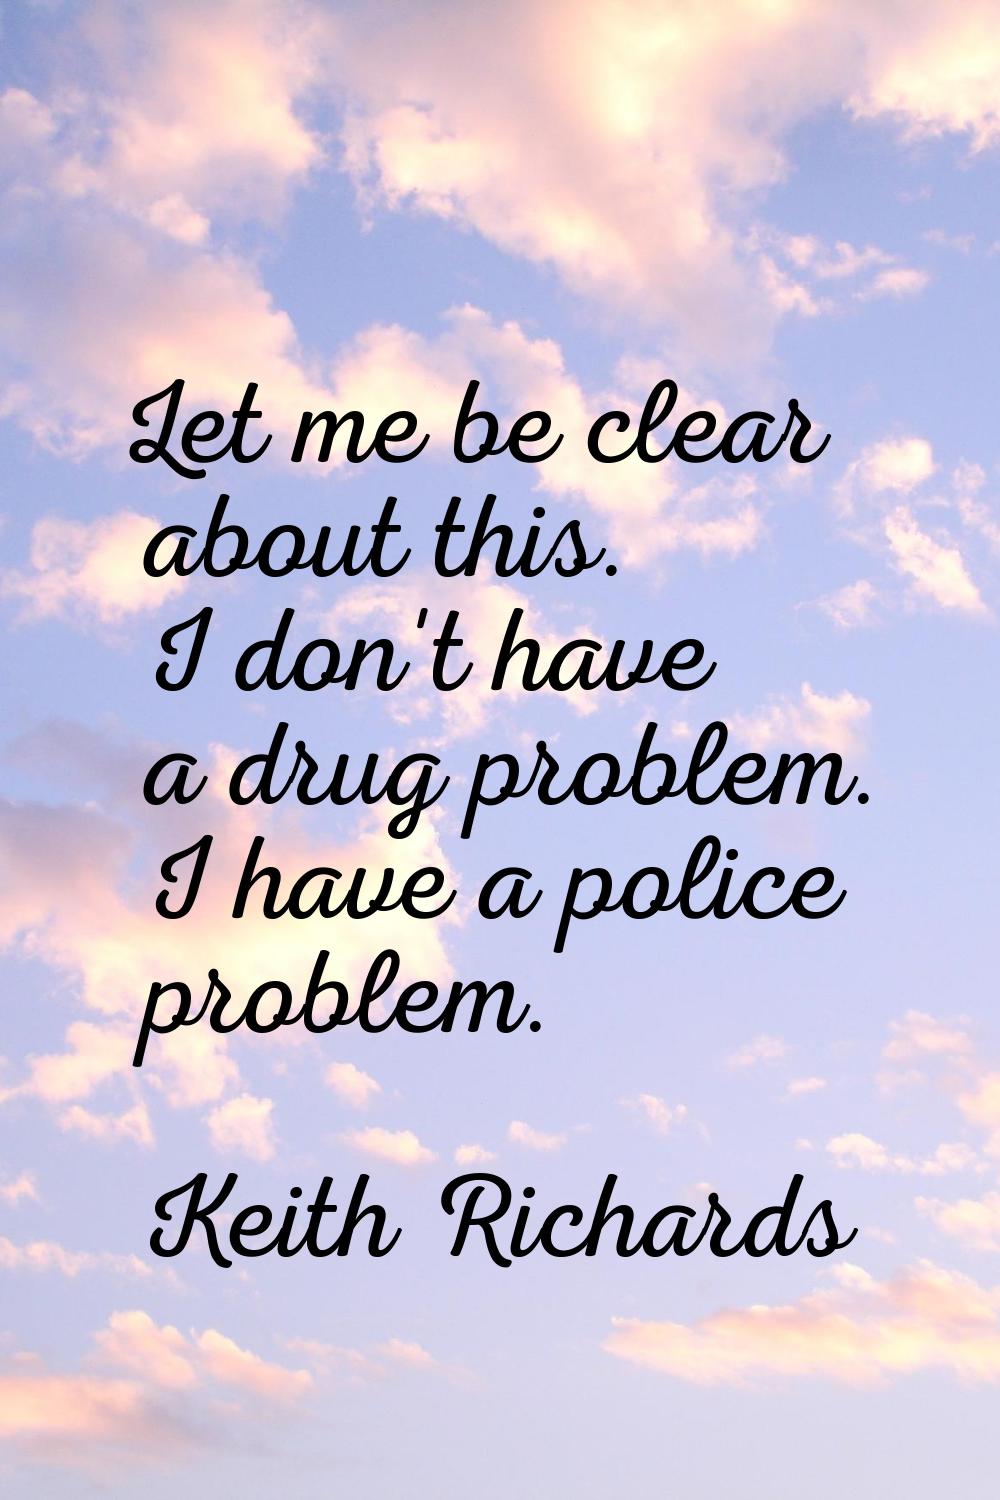 Let me be clear about this. I don't have a drug problem. I have a police problem.